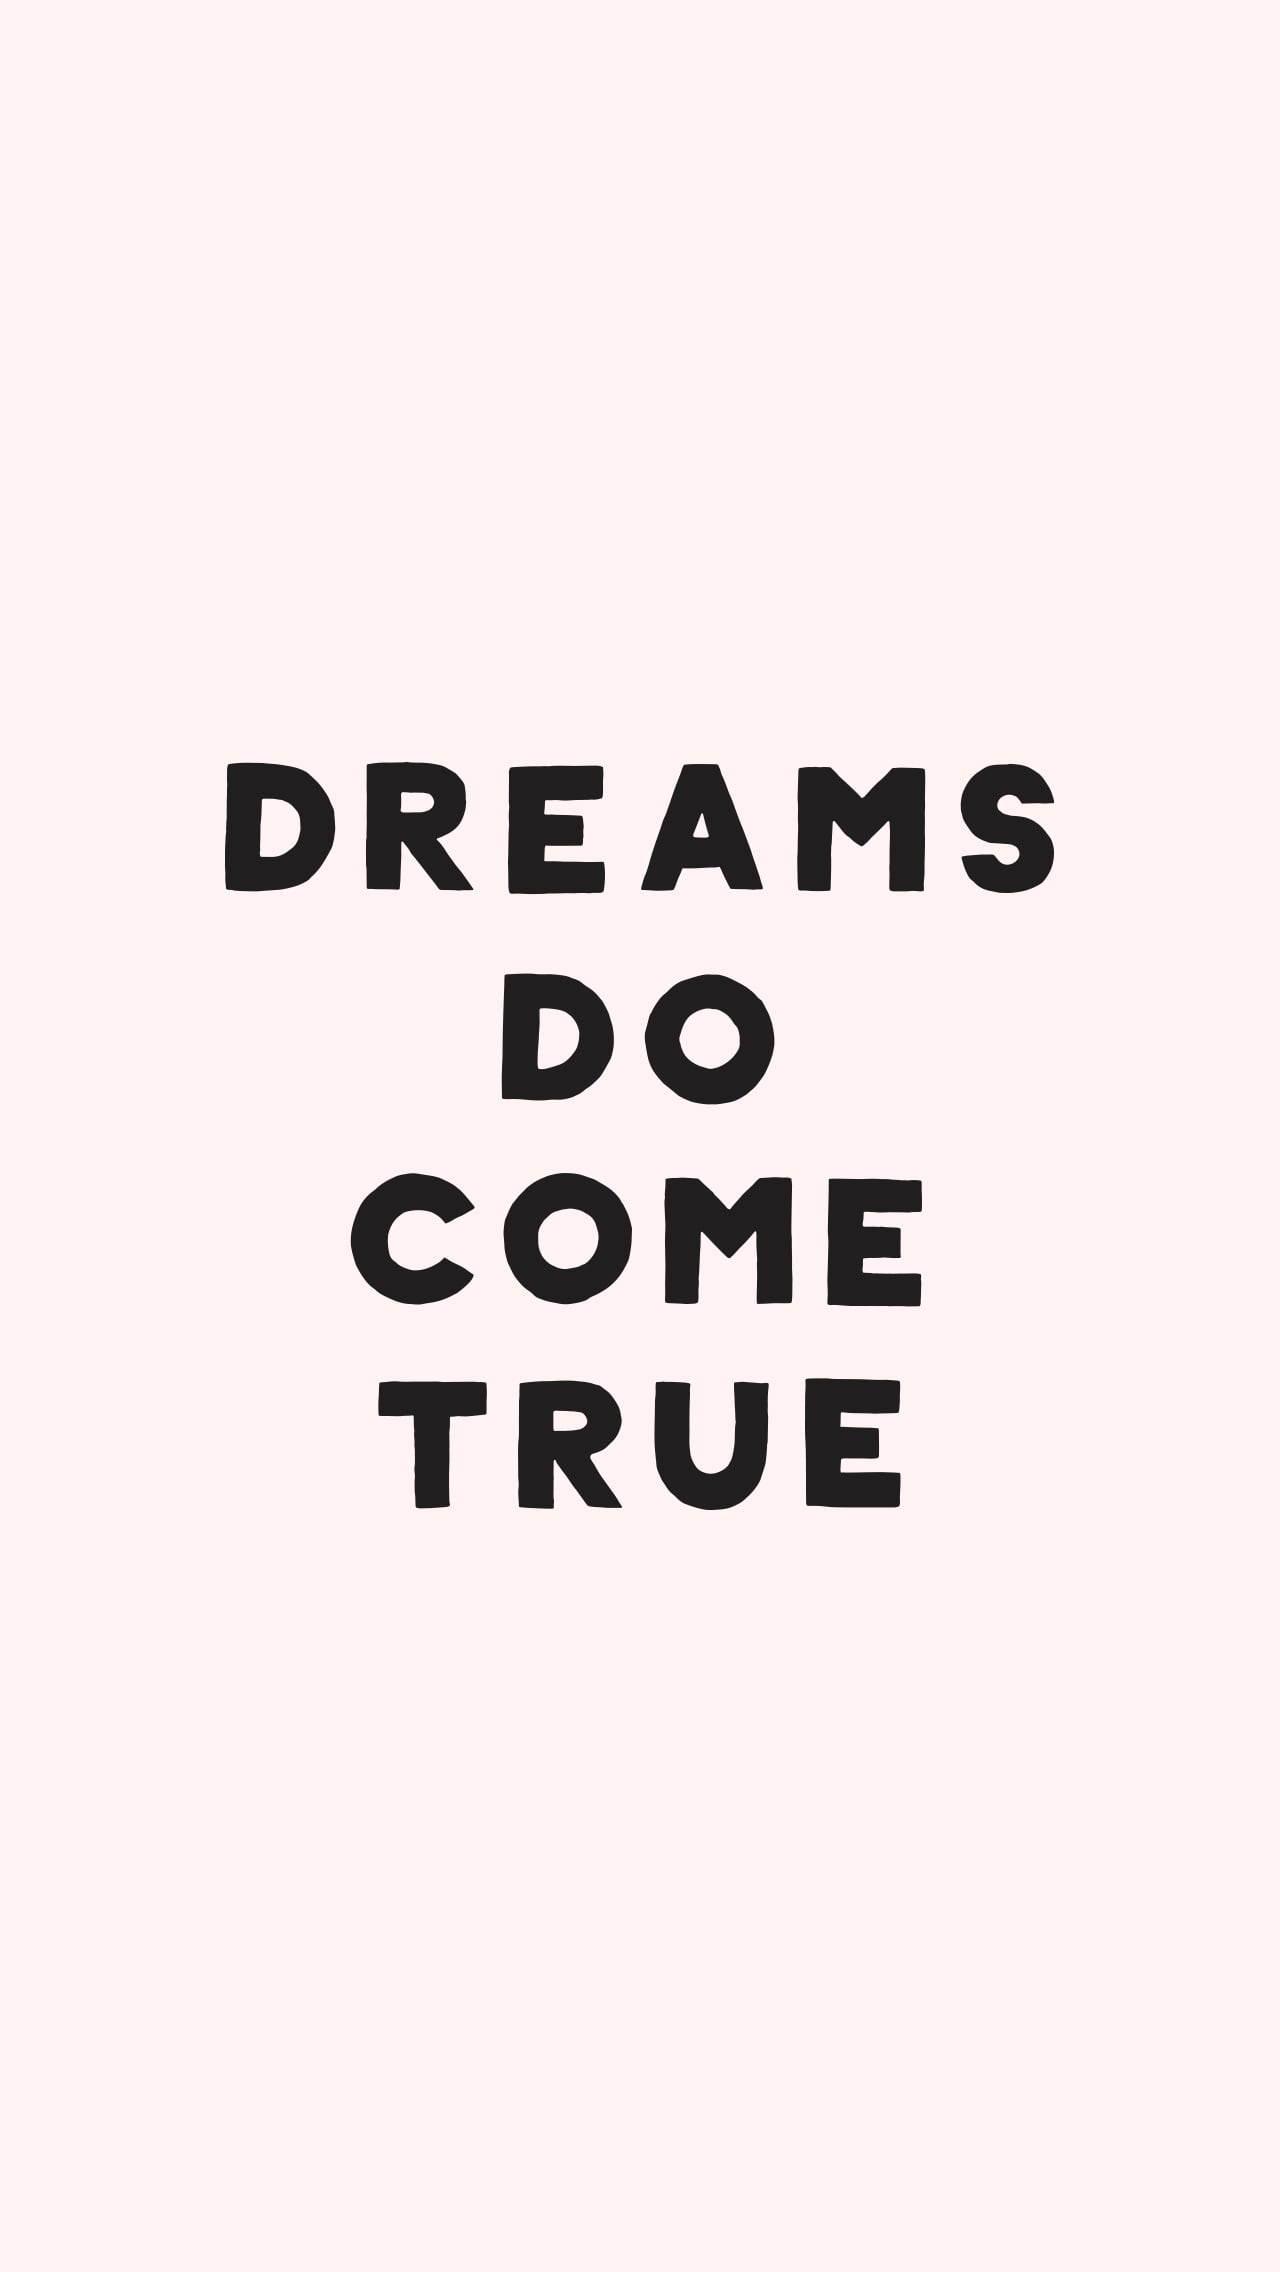 Dreams Do Come True Free and Fun iPhone Wallpaper to Liven Up Your Life